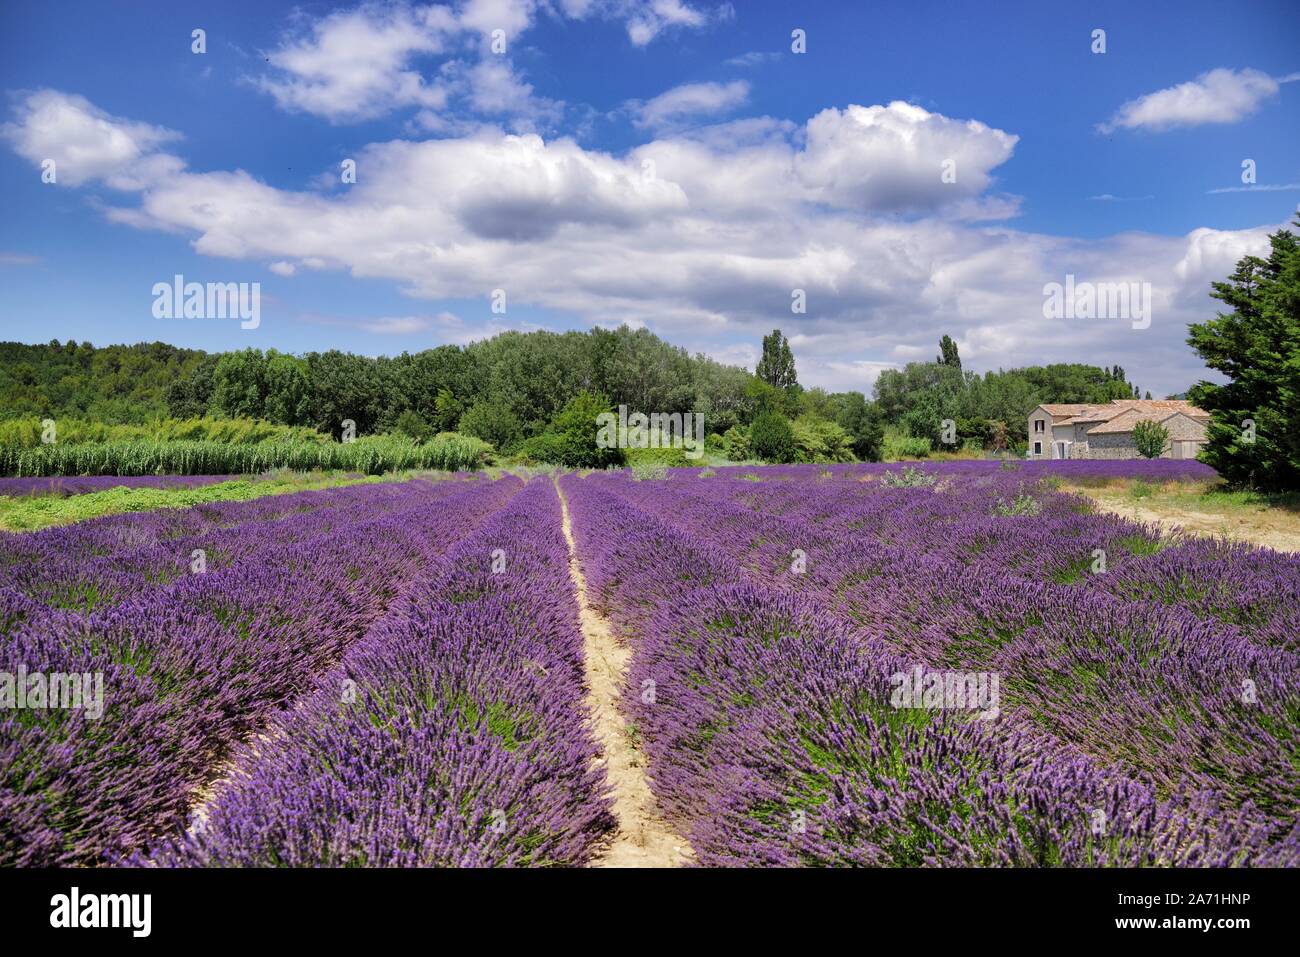 Lavender field in Provence in Southern France during summer season Stock Photo